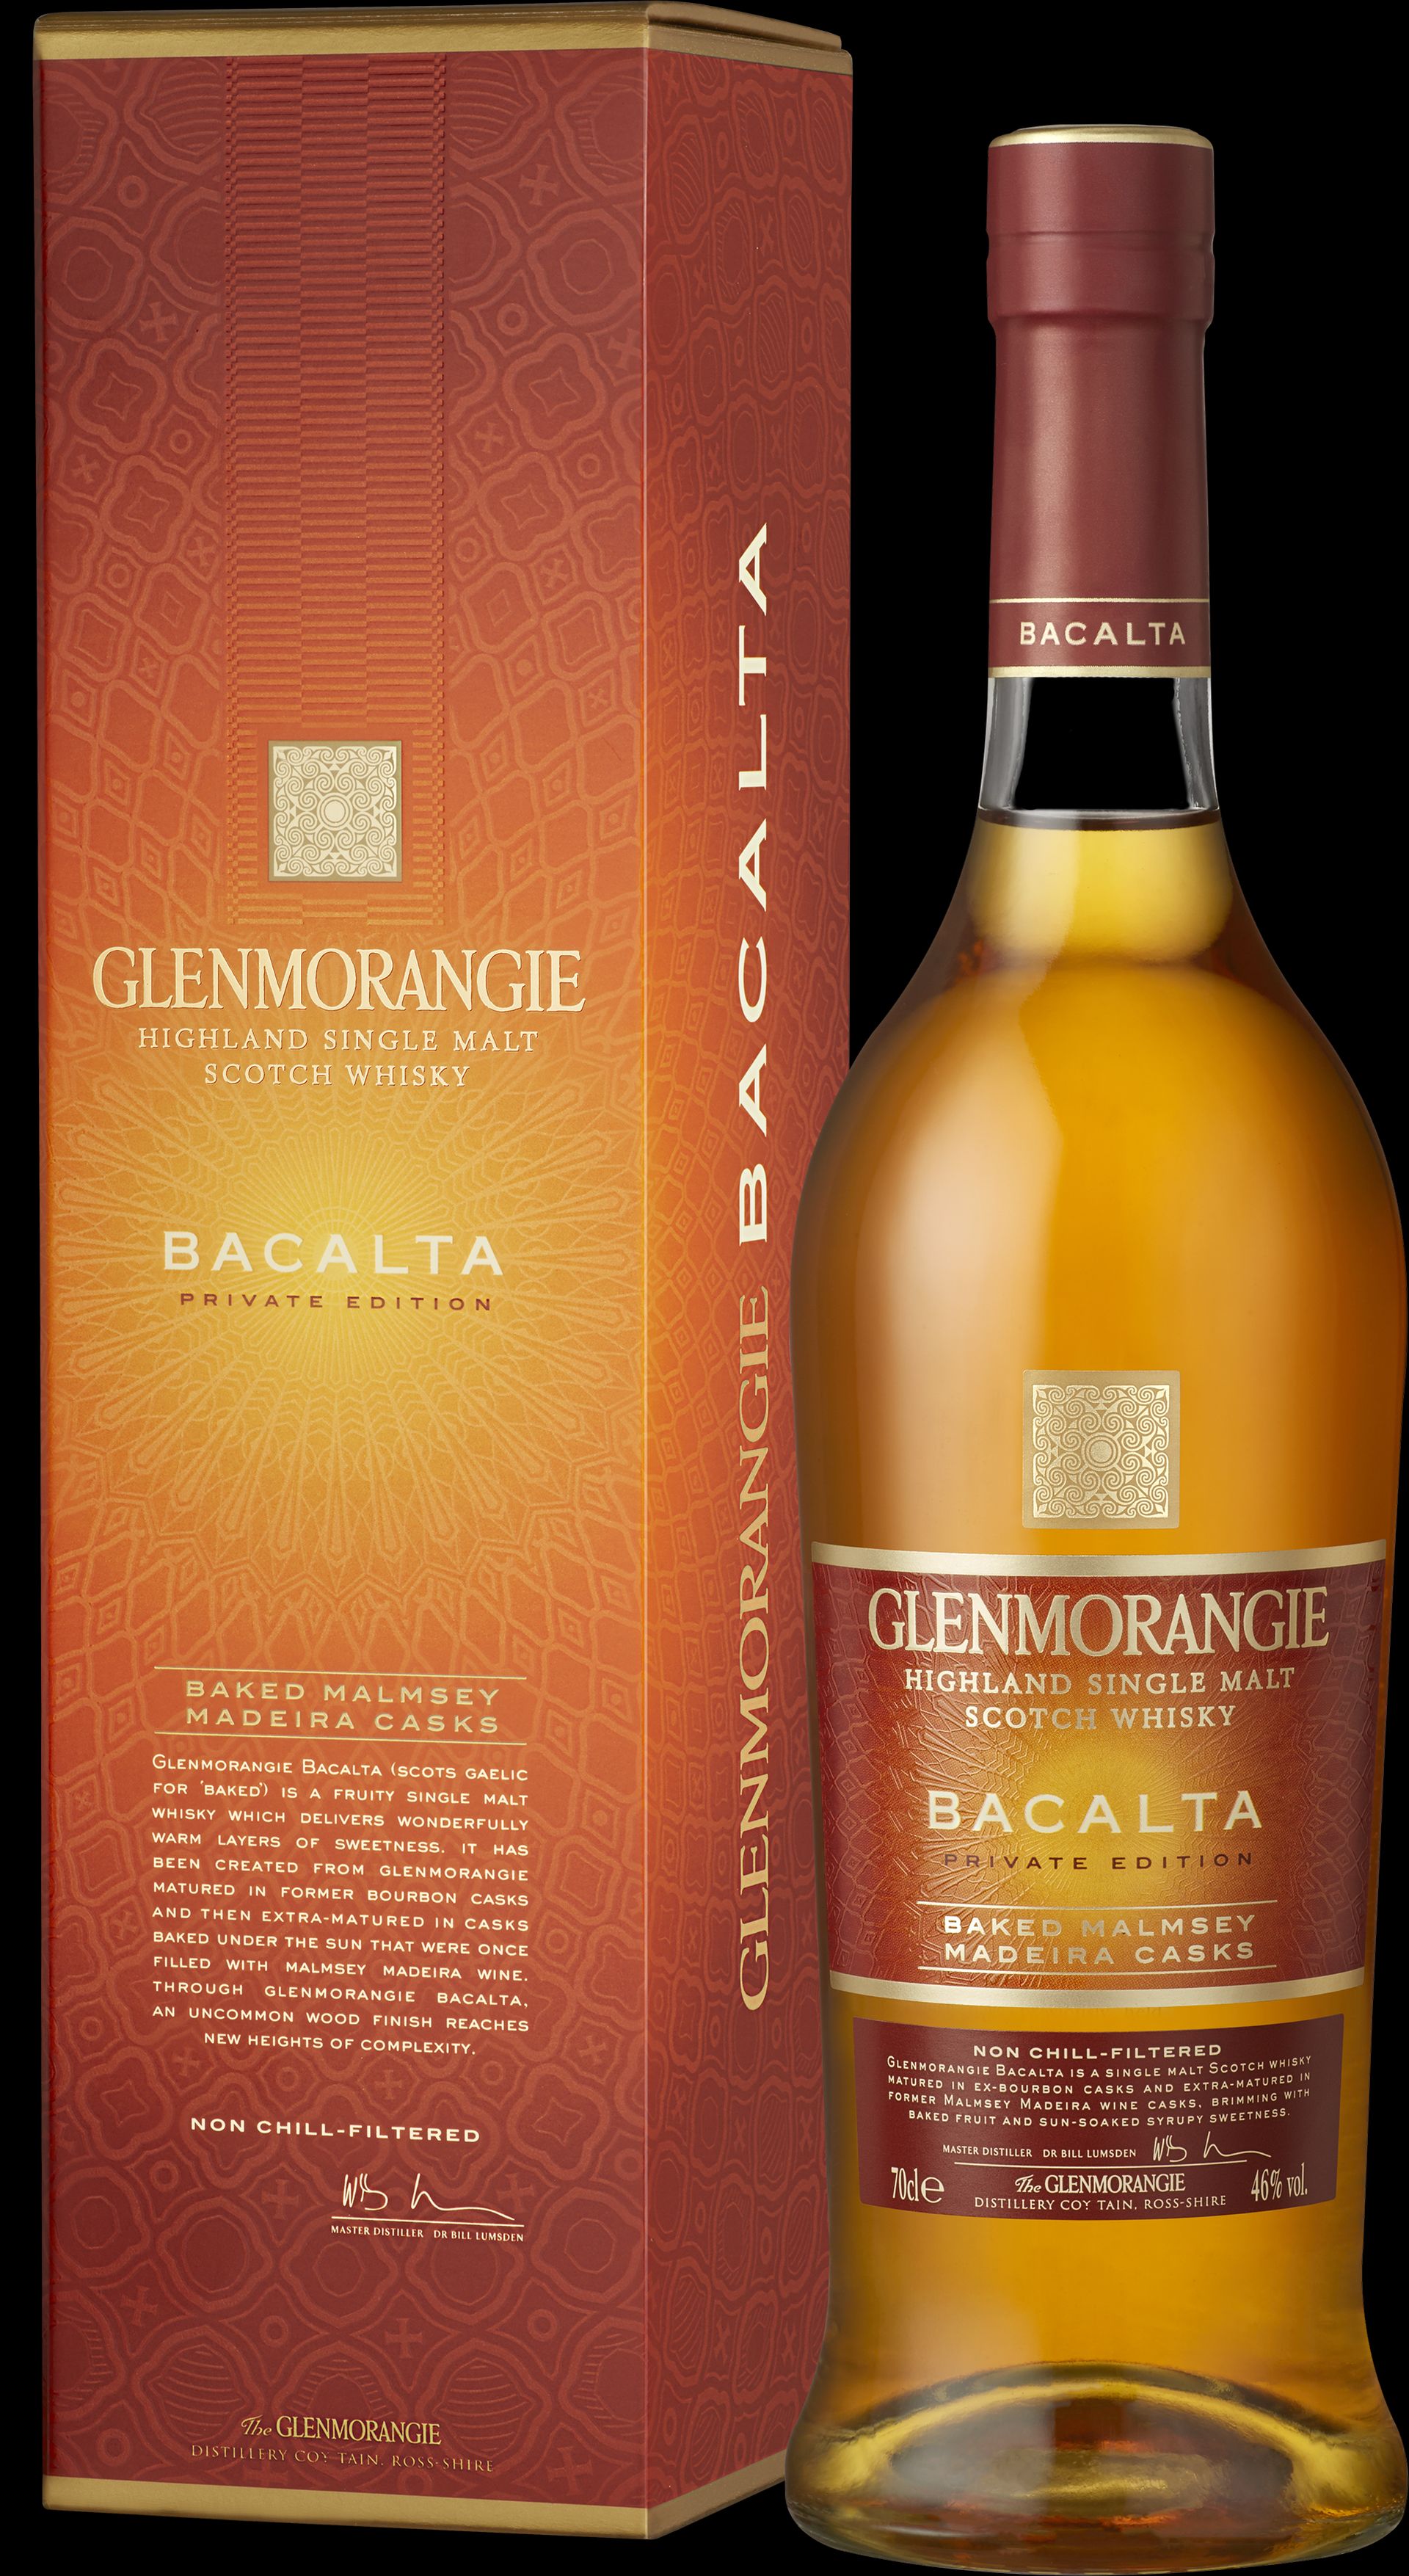 Glenmorangie Bacalta Private Edition Whisky